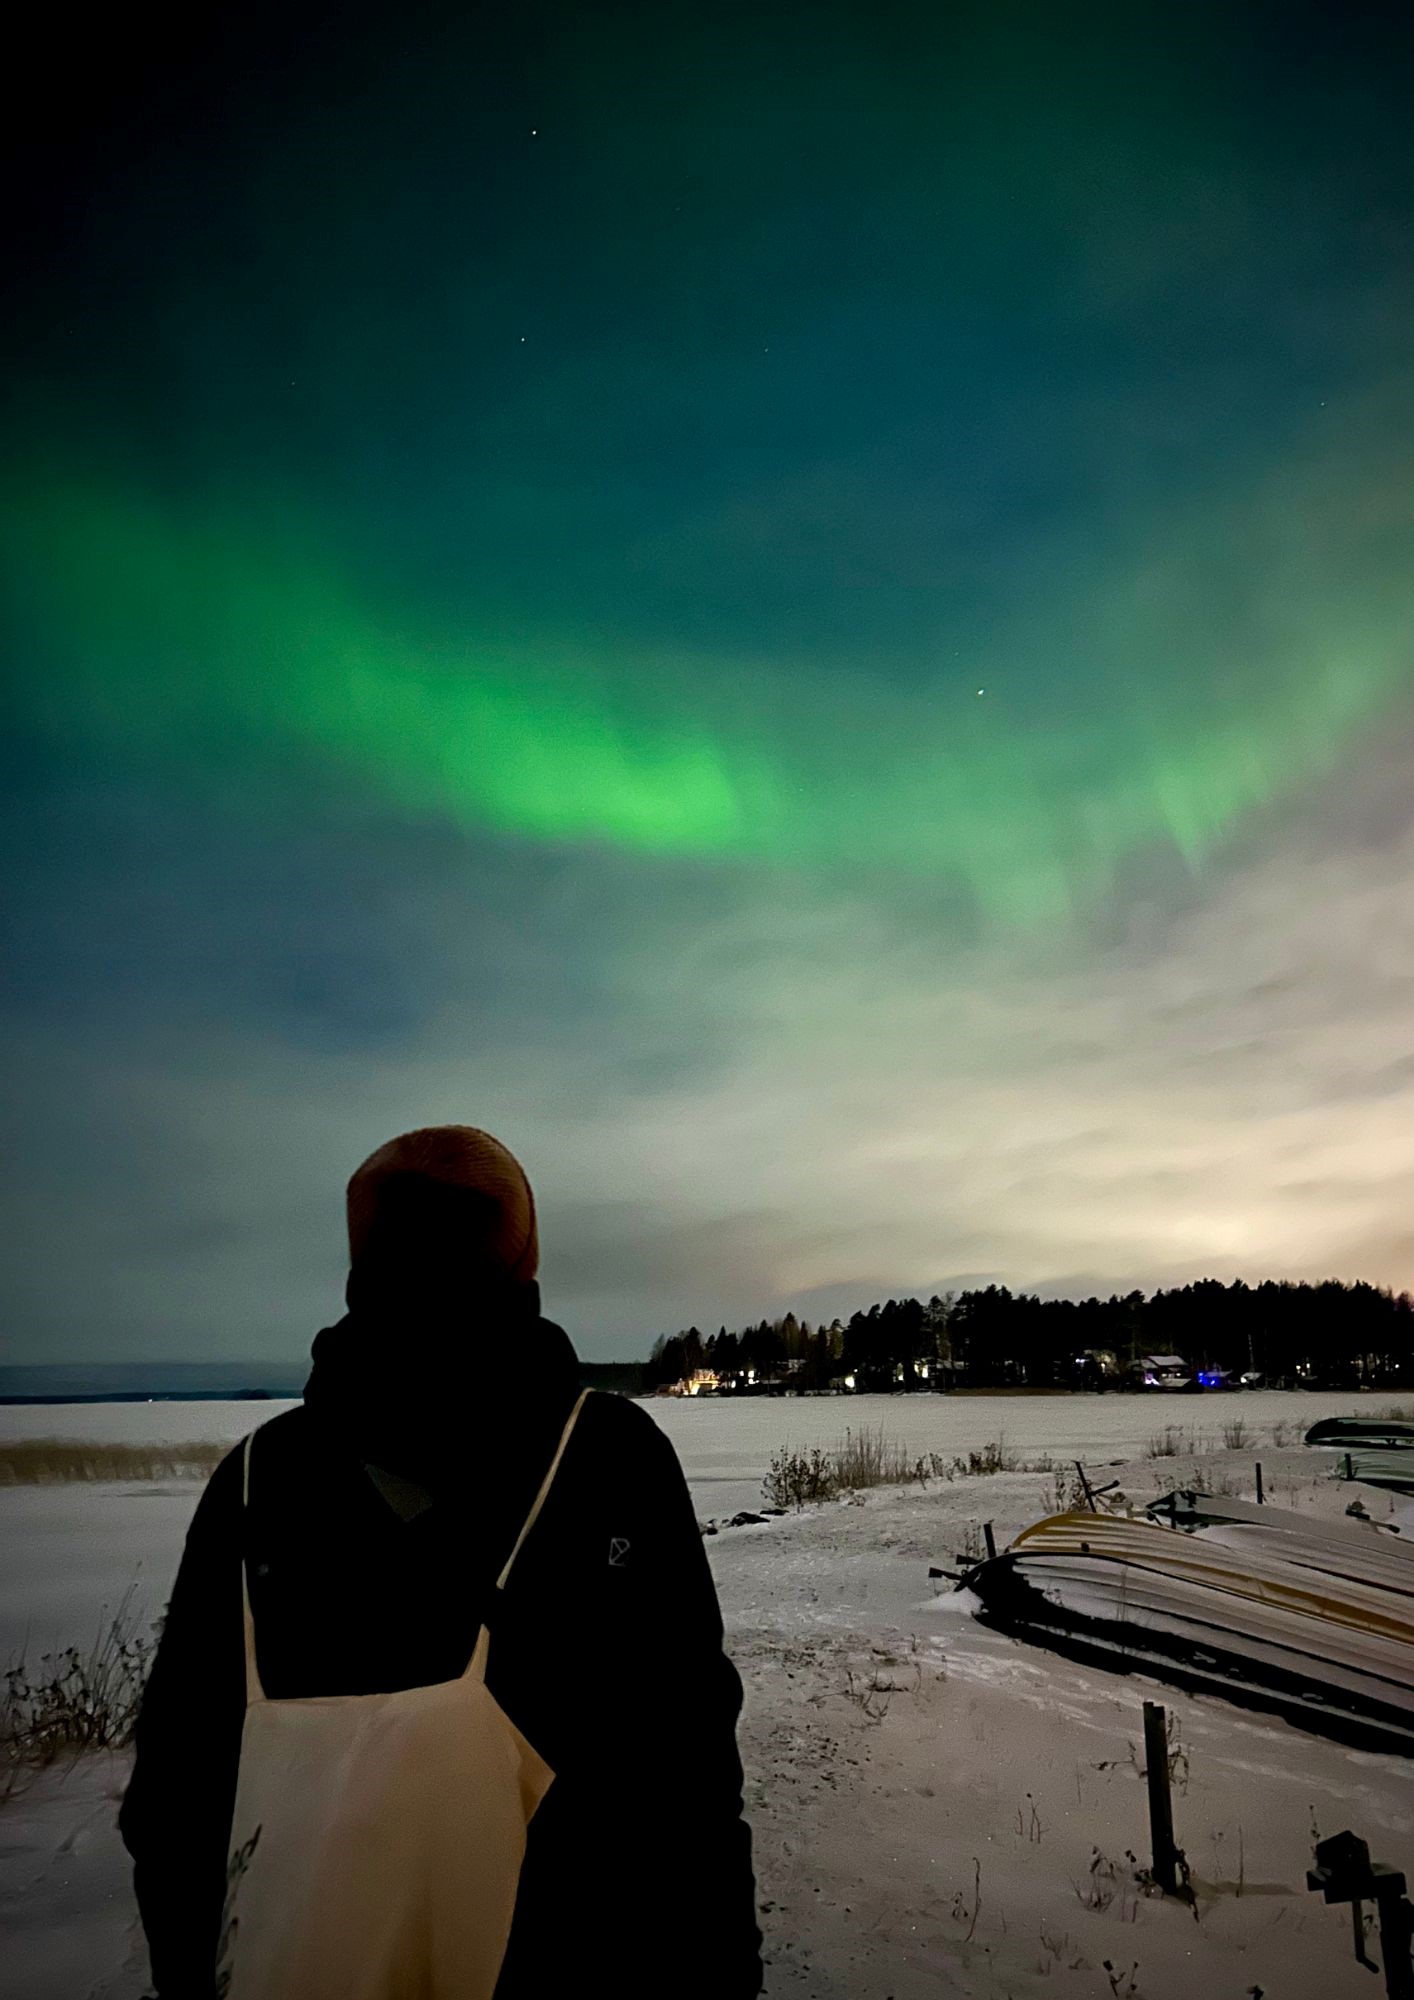 This image captures the essence that taking risks leads to the most rewarding experiences. When I chose the University of Eastern Finland (UEF), I expected to witness the northern lights frequently. Surprisingly, during my entire stay in Joensuu, I only saw them once, and I almost missed it. On the day this photo was taken, I wasn't feeling well. Overwhelmed by my coursework, I simply wanted a quiet night in bed. When my roommate mentioned an increased chance of seeing the northern lights, I hesitated but l